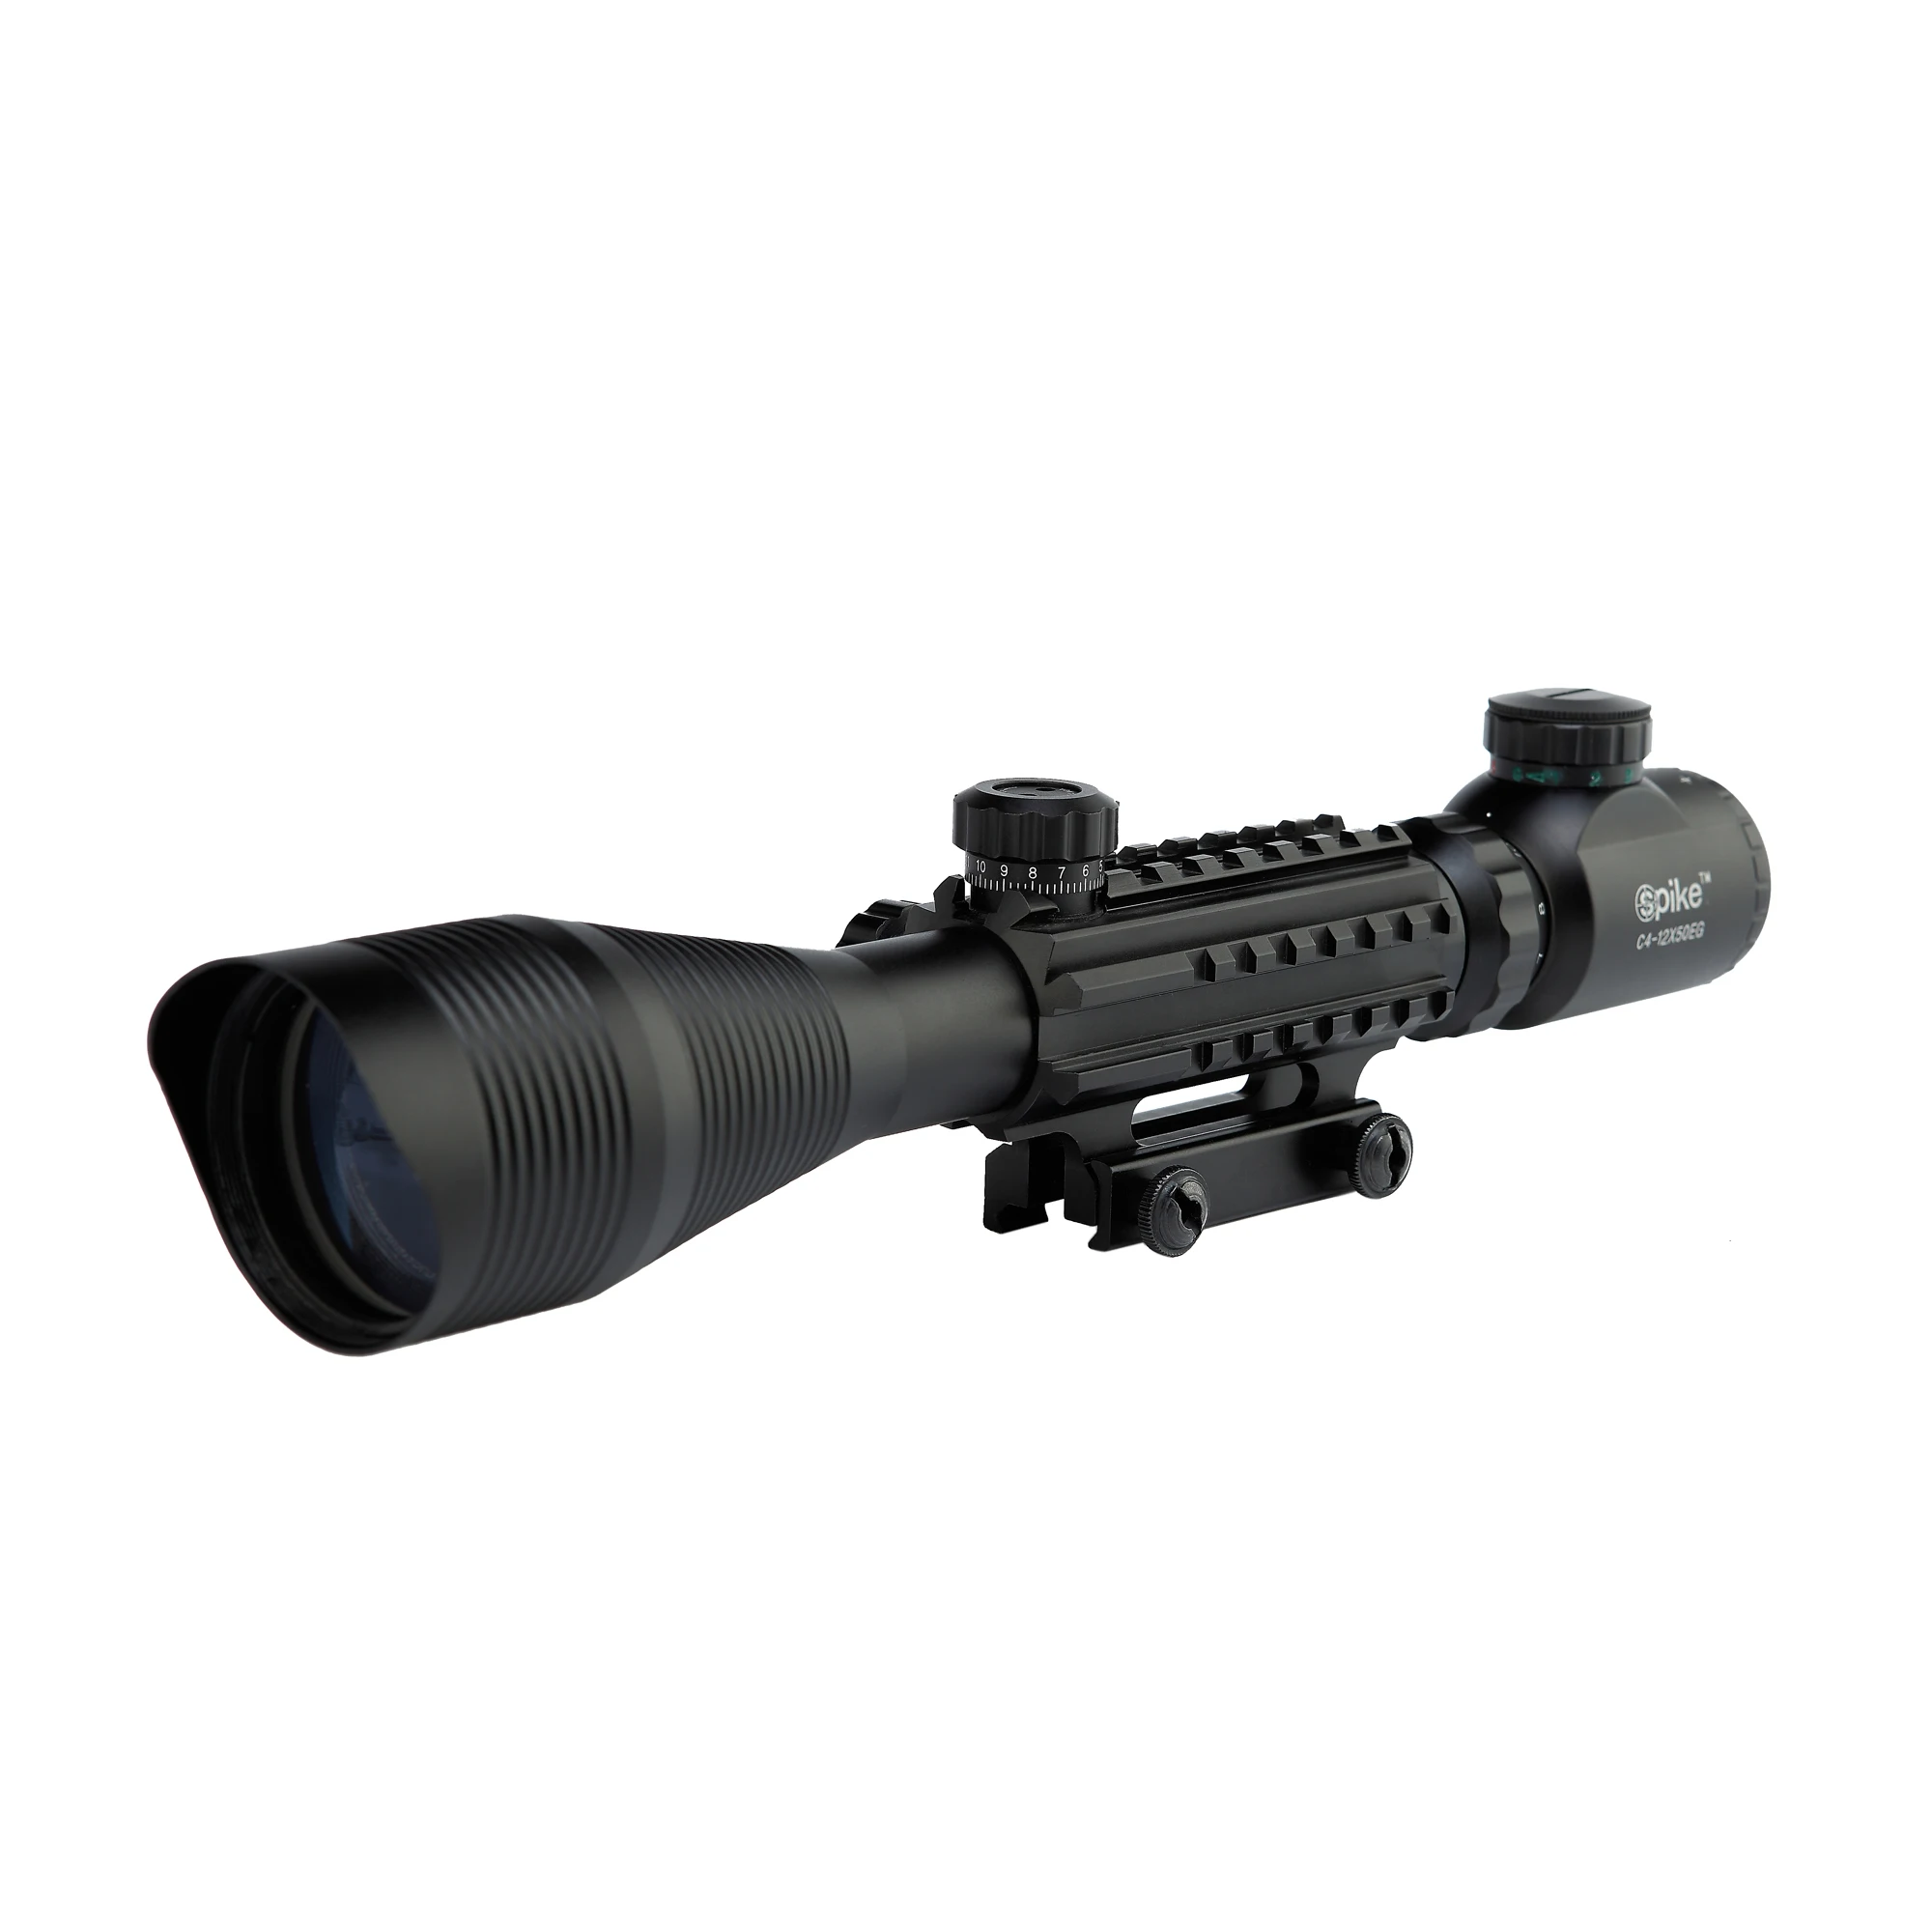 Spike C4 12x50EG Dual Illuminated Optical Scope,  Red Dot Sight and Red Laser Sight